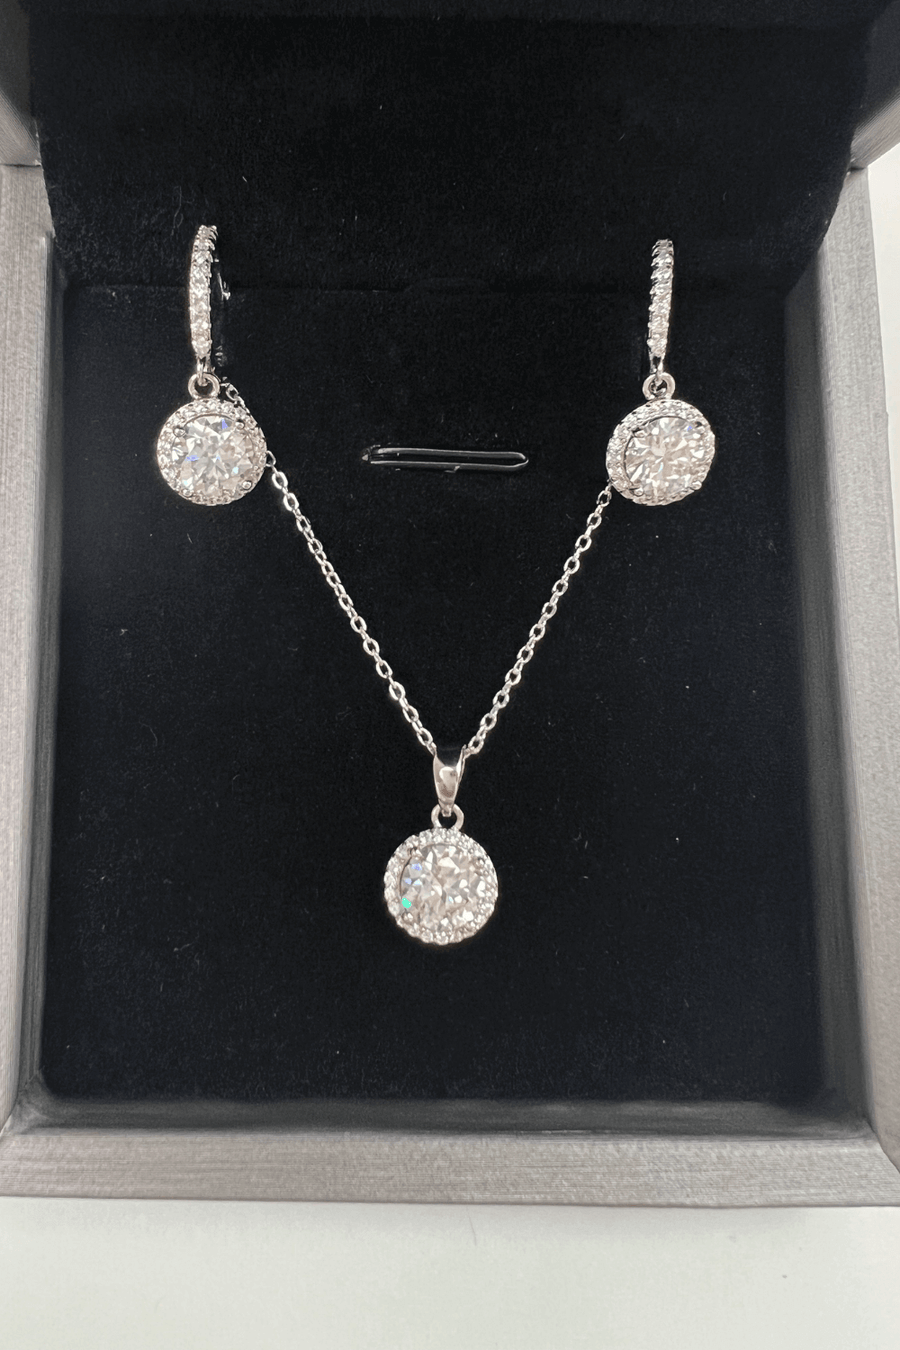 Best Diamond Jewelry Bundle Set Gift | Best Round Diamond Necklace, Earrings Jewelry Gift for Women, Mother, Wife, Daughter | MASON New York